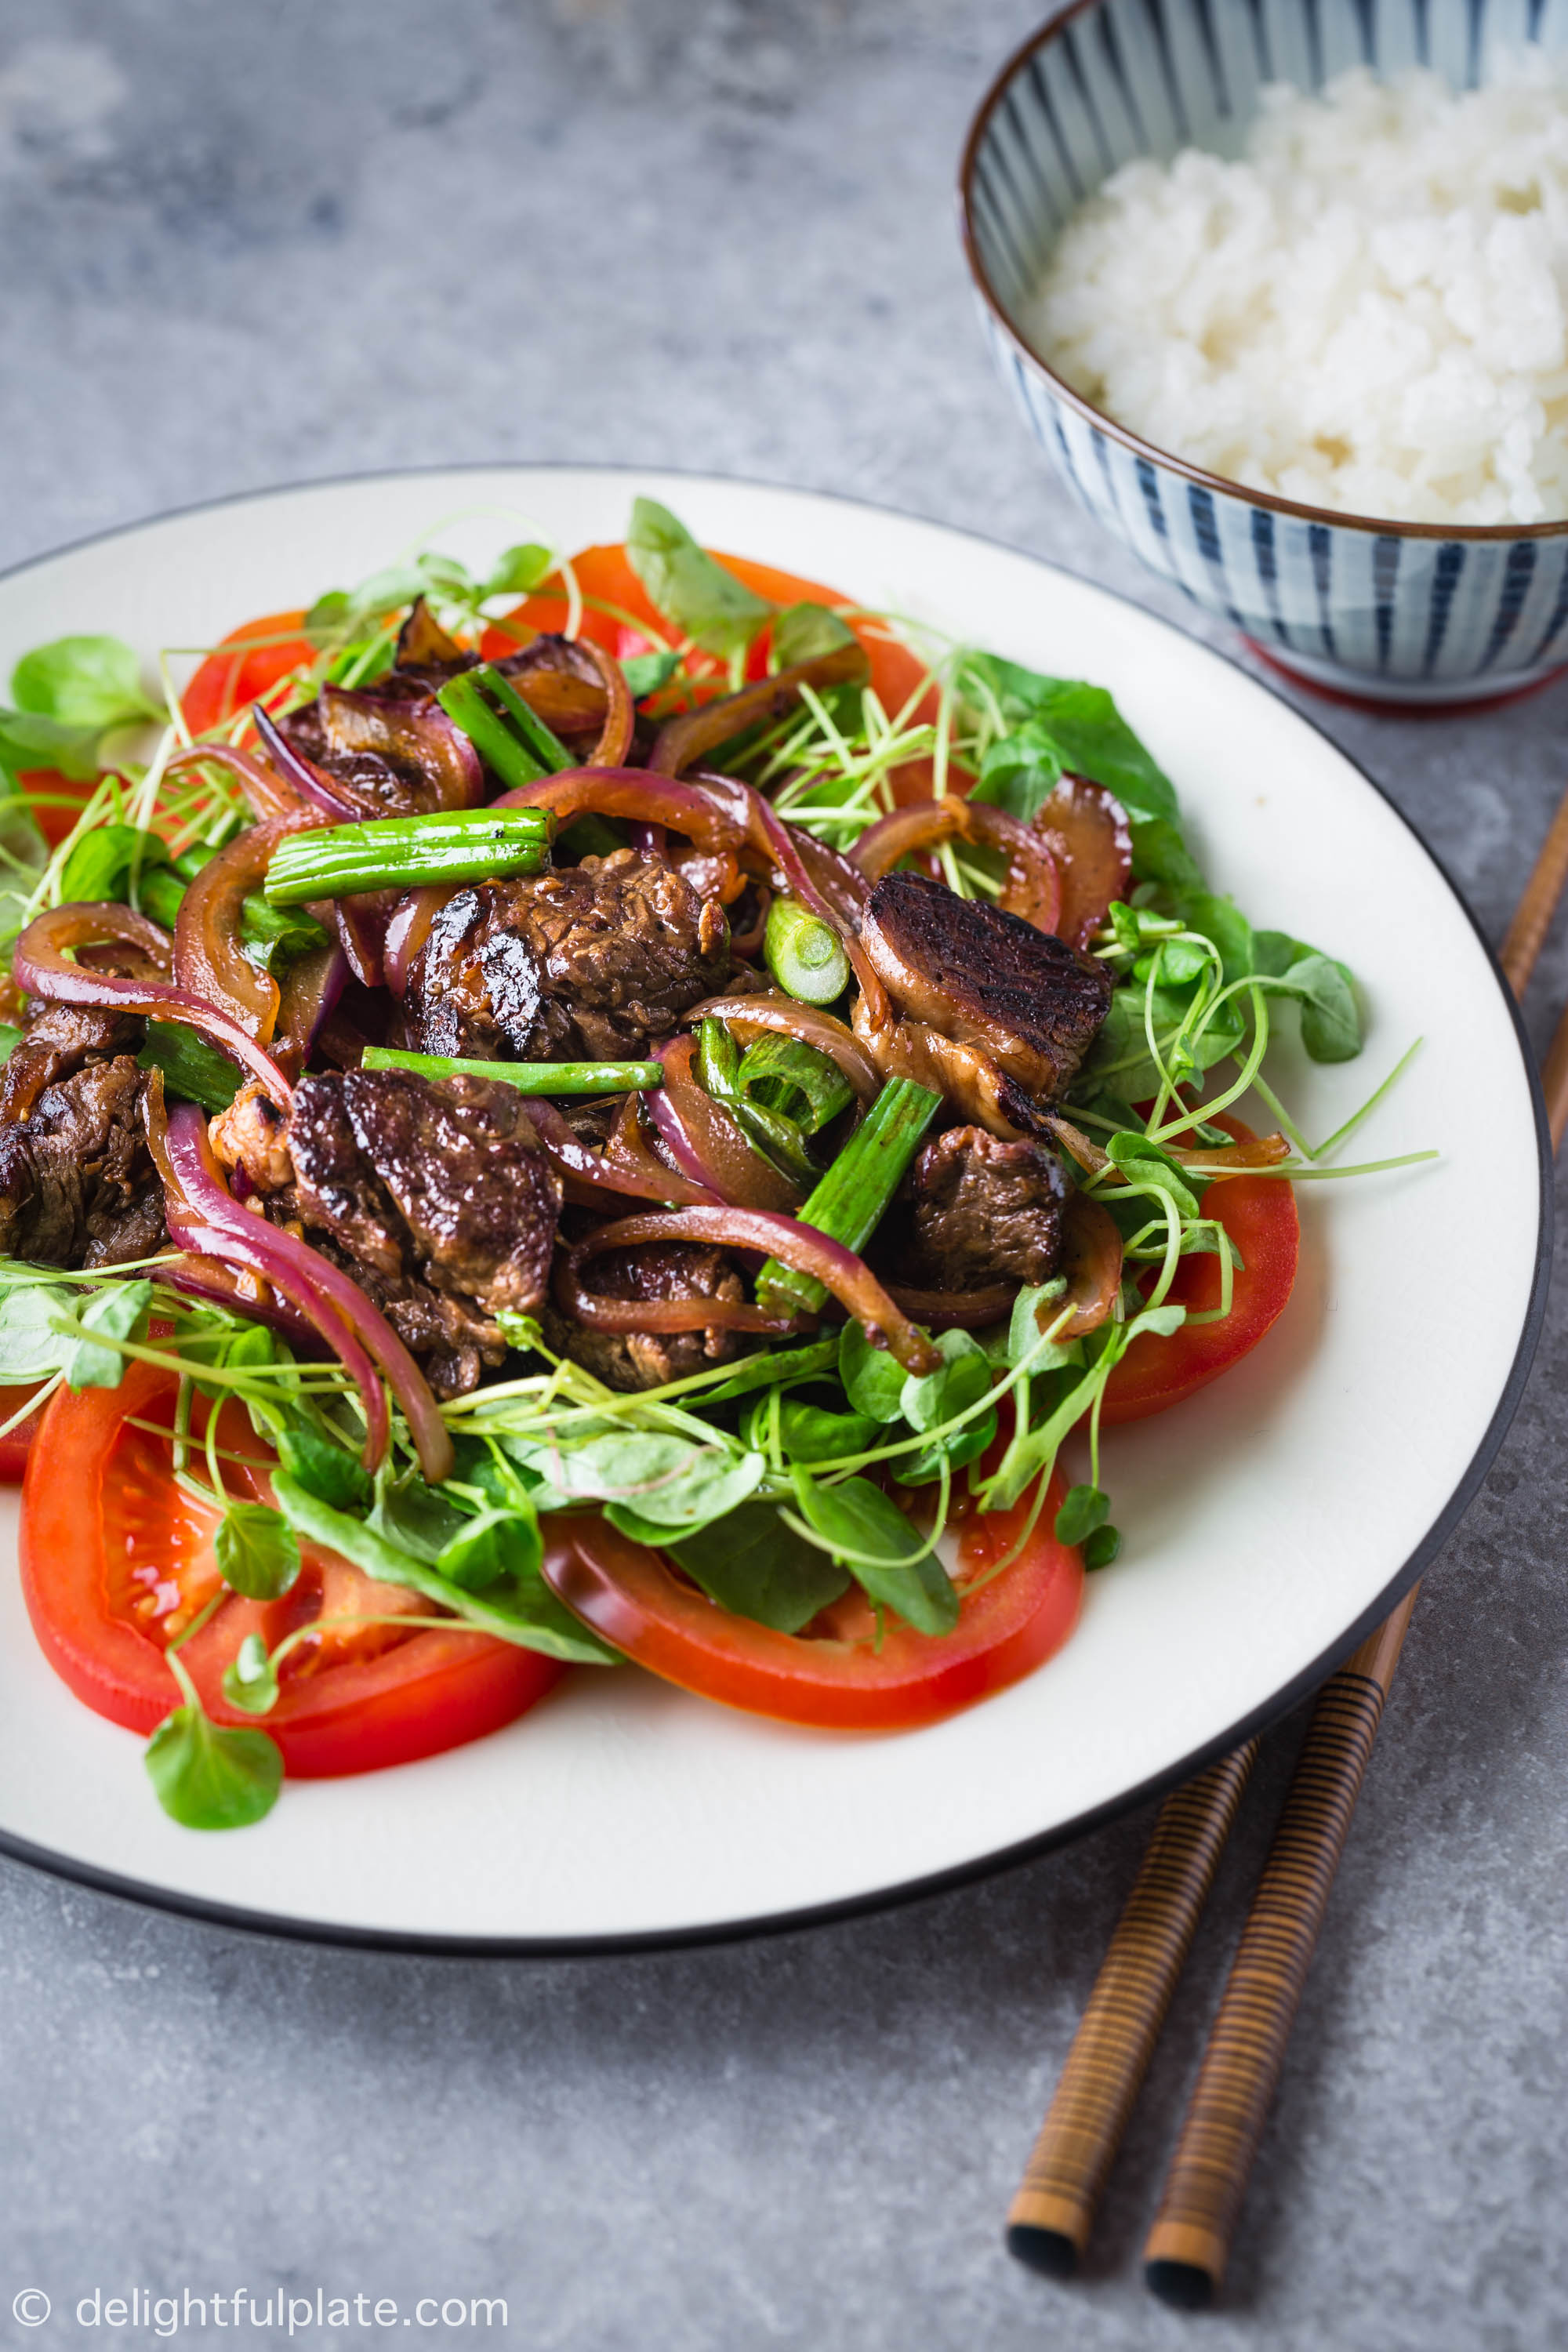 Vietnamese Shaking Beef (Bo Luc Lac) is an easy and delicious one-pan meal that is excellent for everyday meals as well as special occasions. This dish features tender and flavorful beef plated on a bed of green cress and fresh tomatoes.